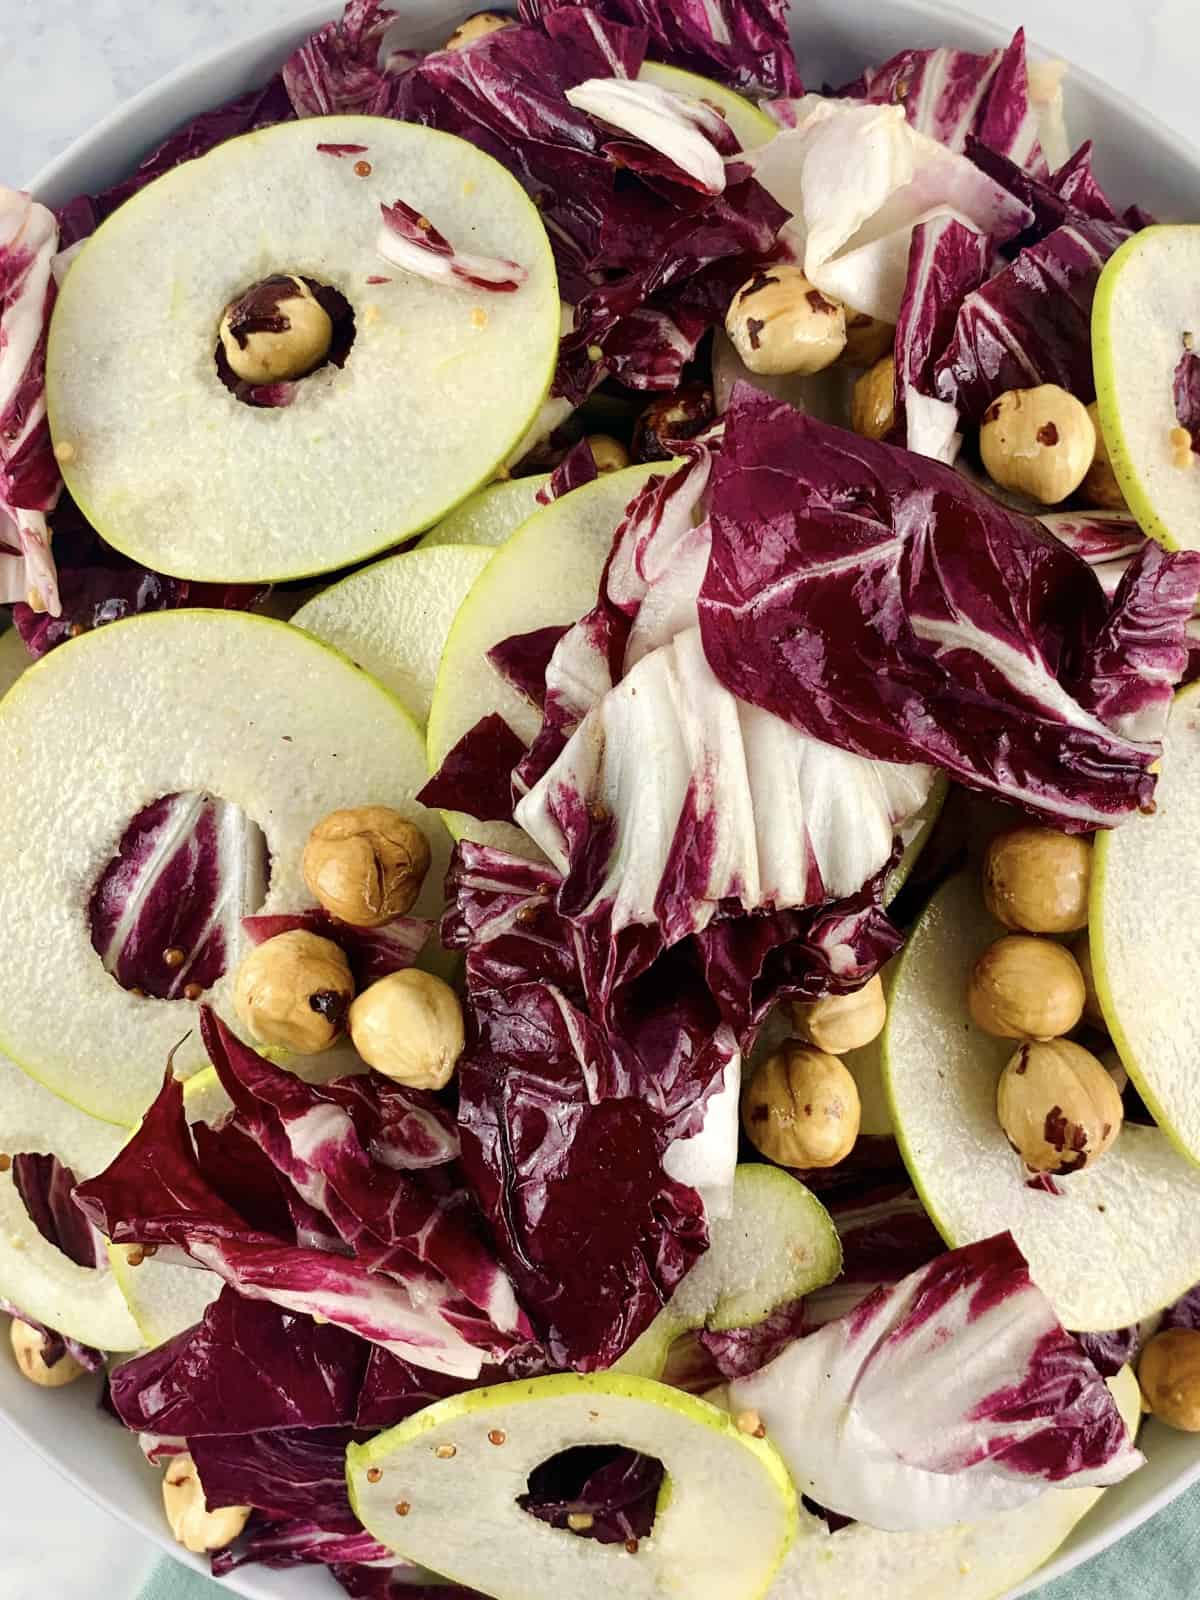 A close-up of Radicchio and pear salad in a white bowl.